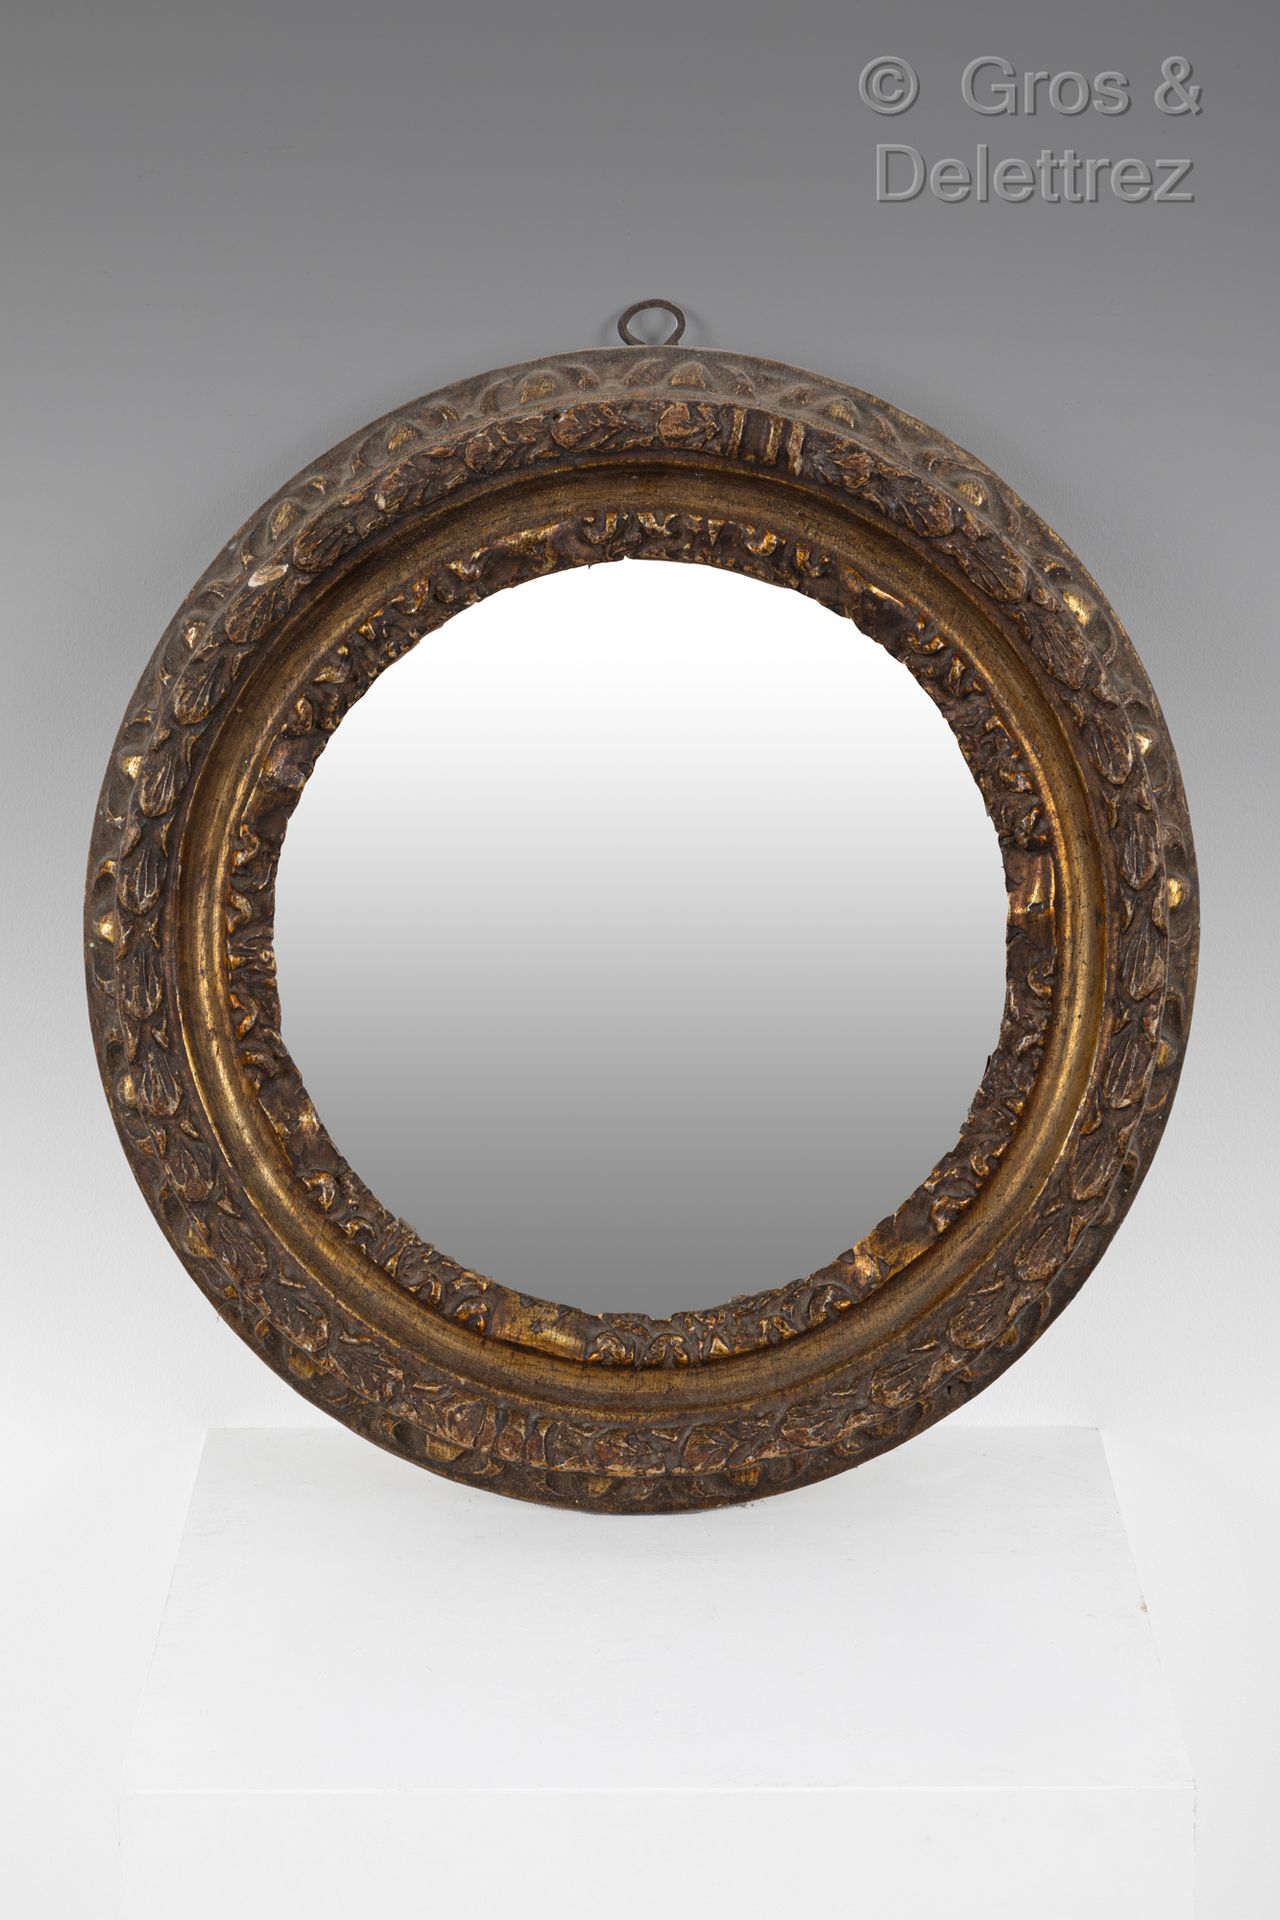 Null Round frame in carved and gilded wood with mecca.

Naples XVIIth century

D&hellip;